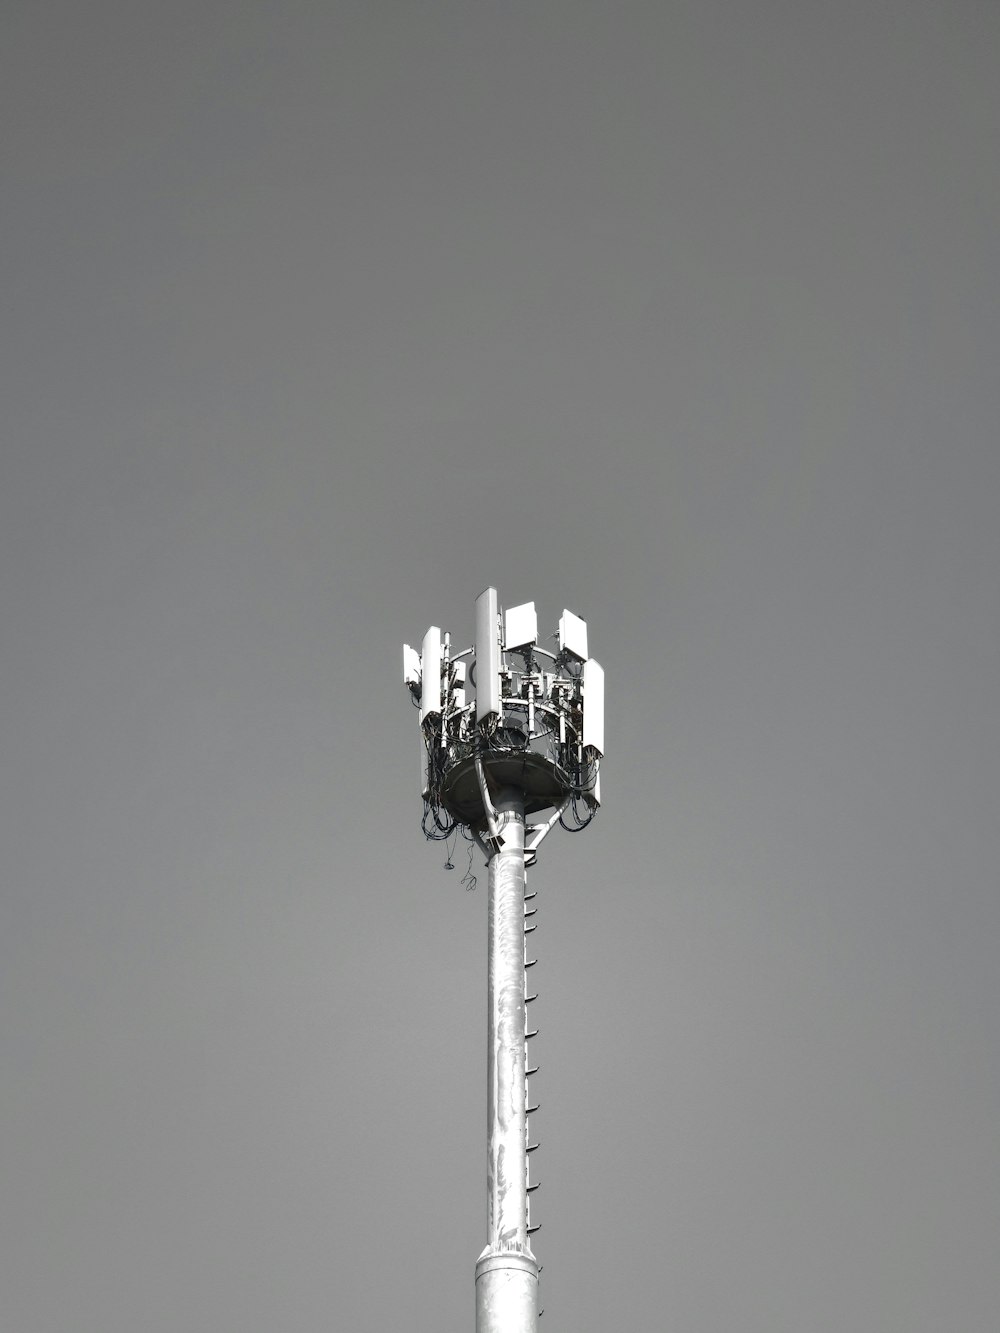 a black and white photo of a cell phone tower